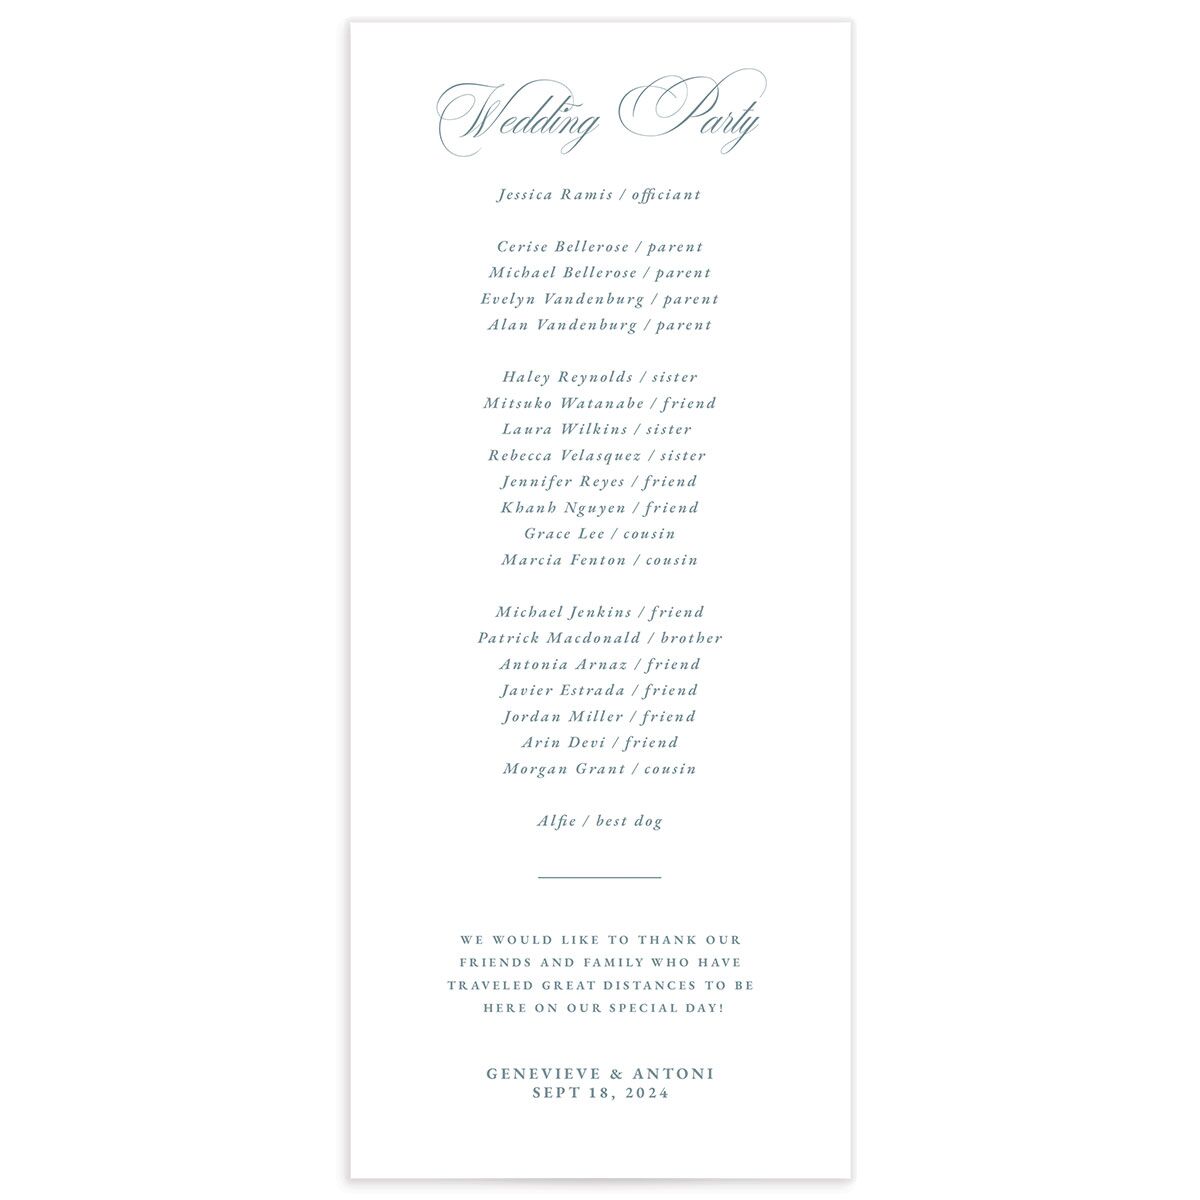 Refined Photograph Wedding Programs back in white